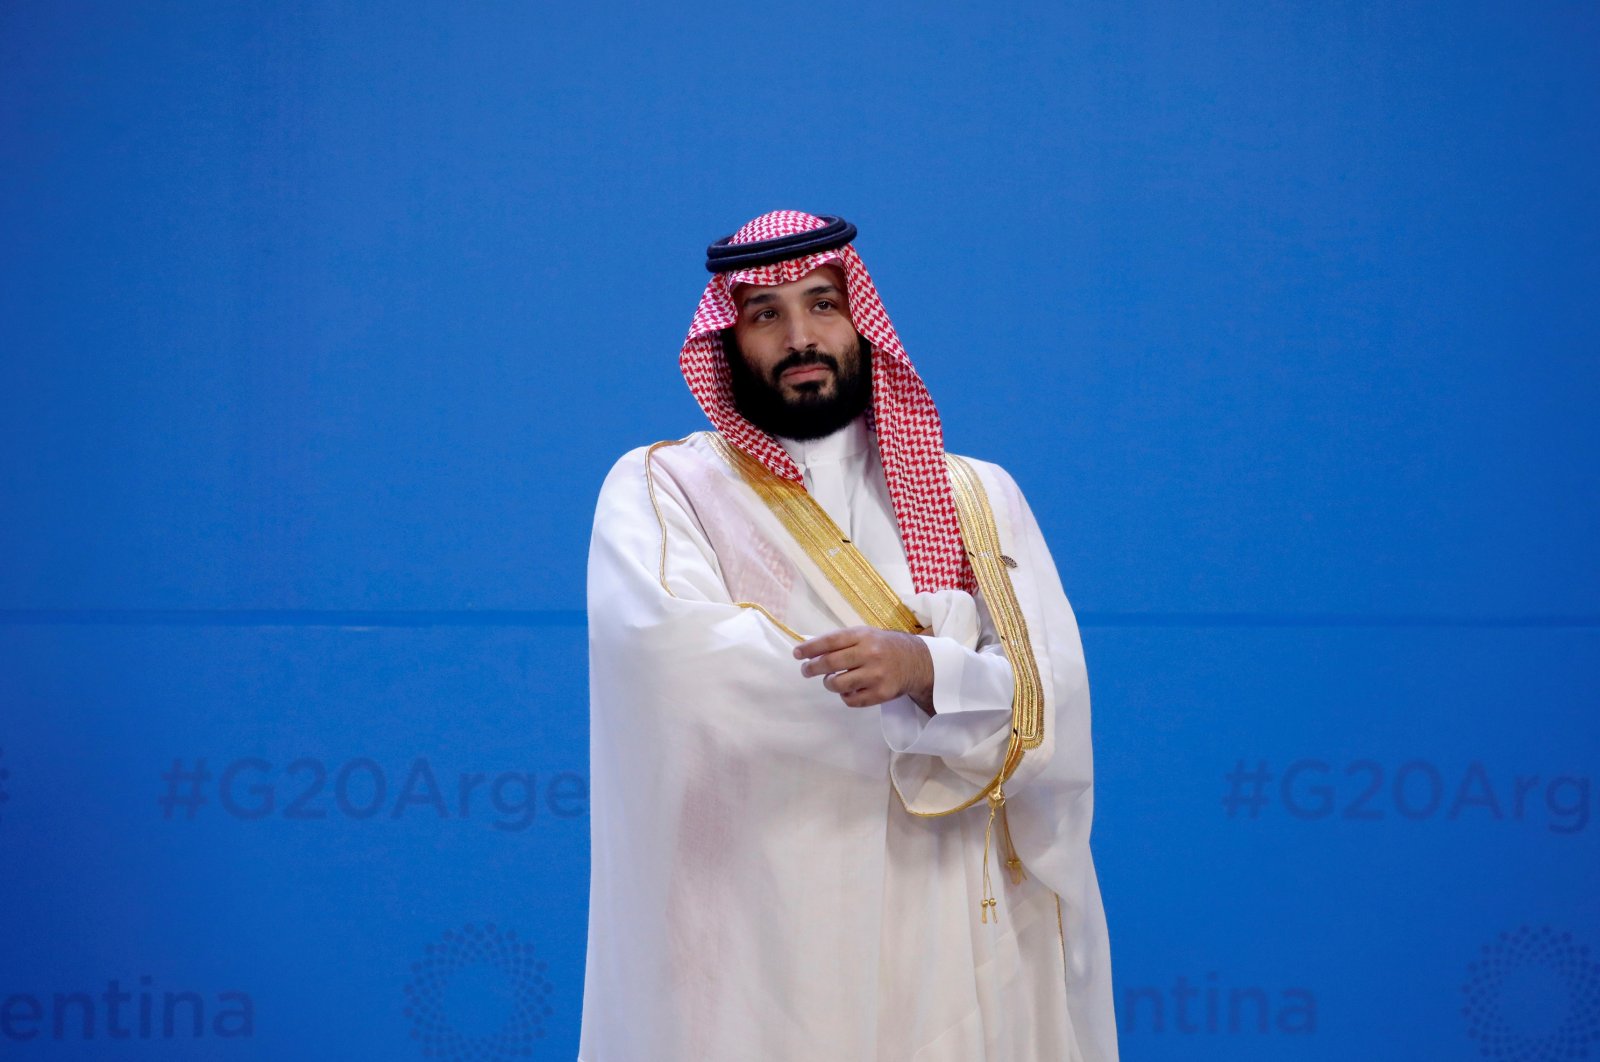 Saudi Arabia's Crown Prince Mohammed bin Salman waits for the family photo during the G20 summit, Buenos Aires, Nov. 30, 2018. (REUTERS Photo)